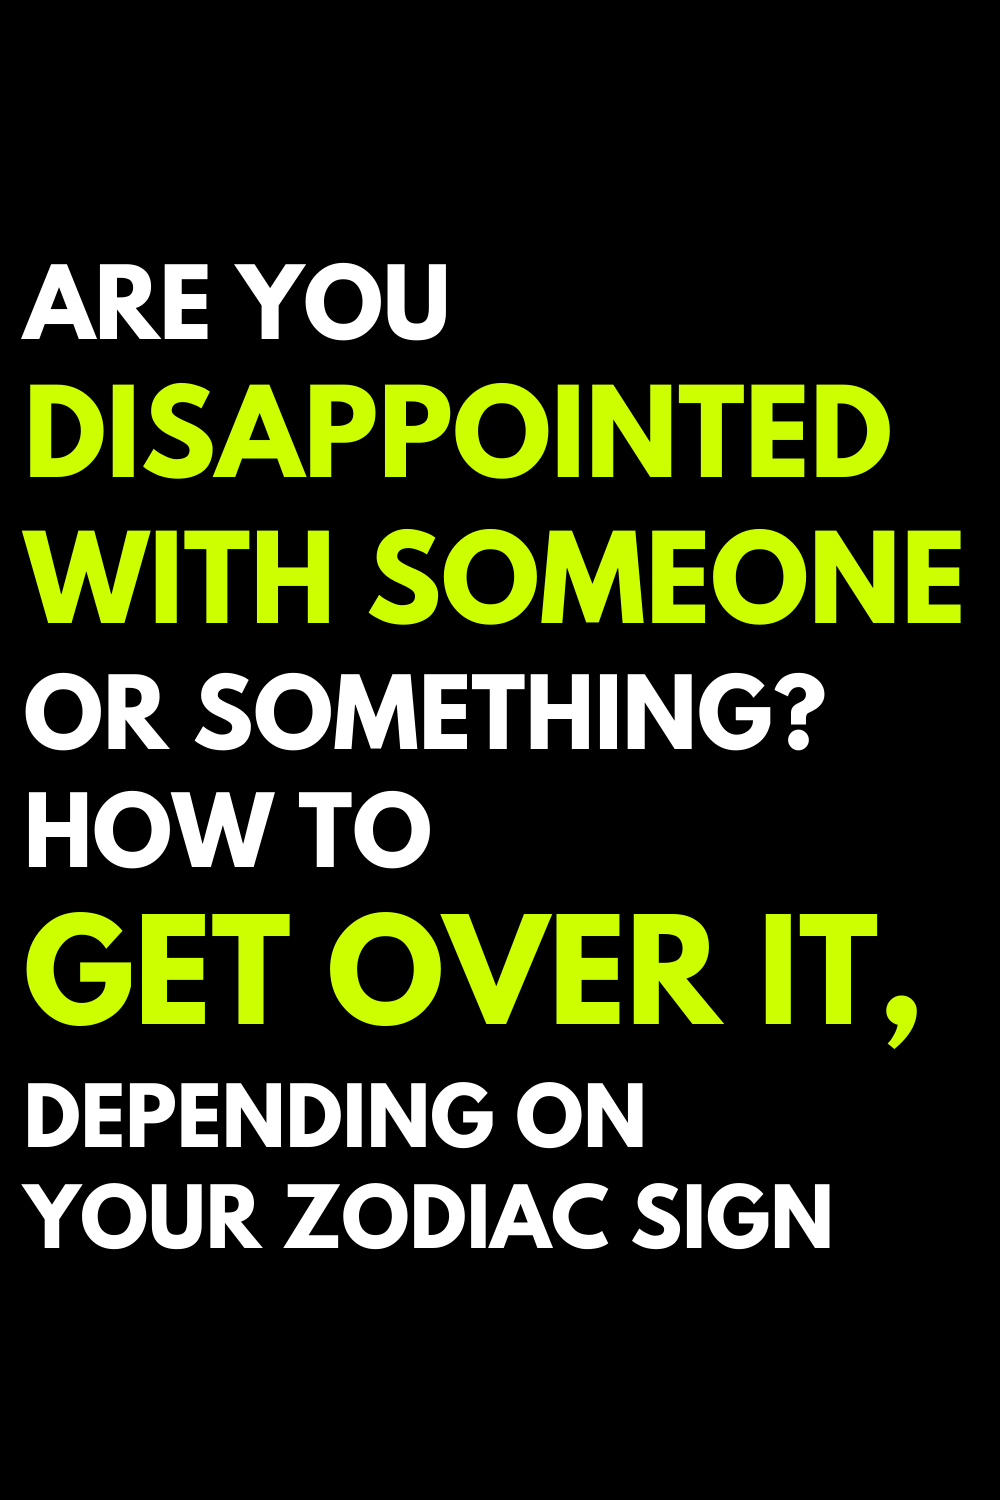 Are you disappointed with someone or something? How to get over it, depending on your zodiac sign